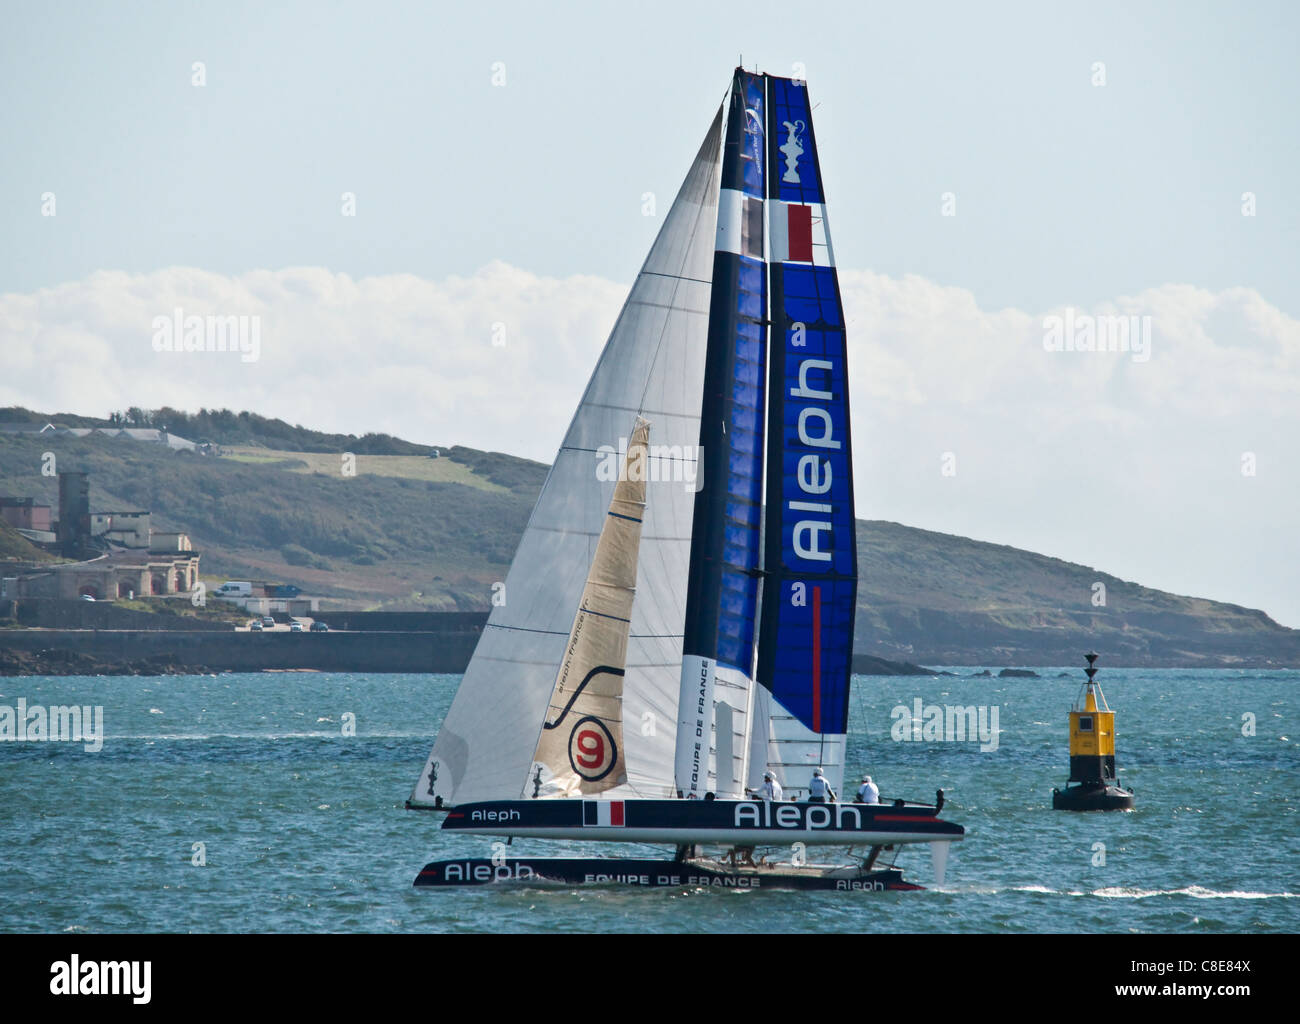 Team Aleph nell'Americas Cup, Plymouth Sound Settembre 2011 Foto Stock